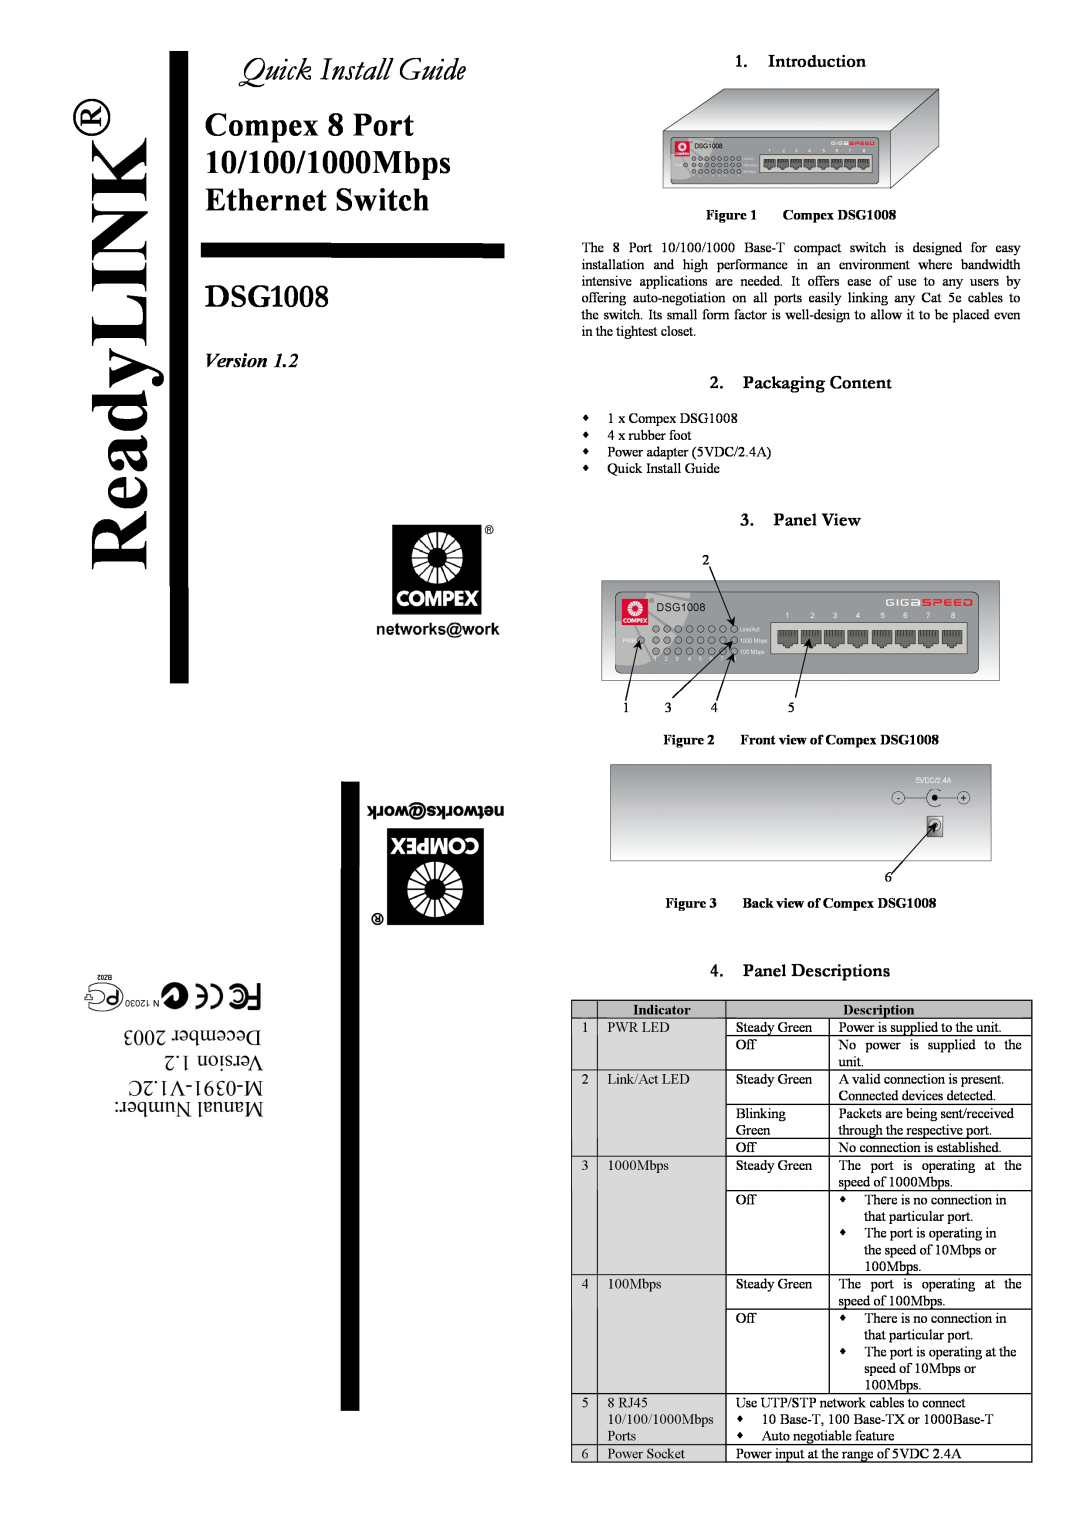 Compex Systems DSG1008 manual Introduction, Packaging Content, Panel View, Panel Descriptions, ReadyLINK, Version 